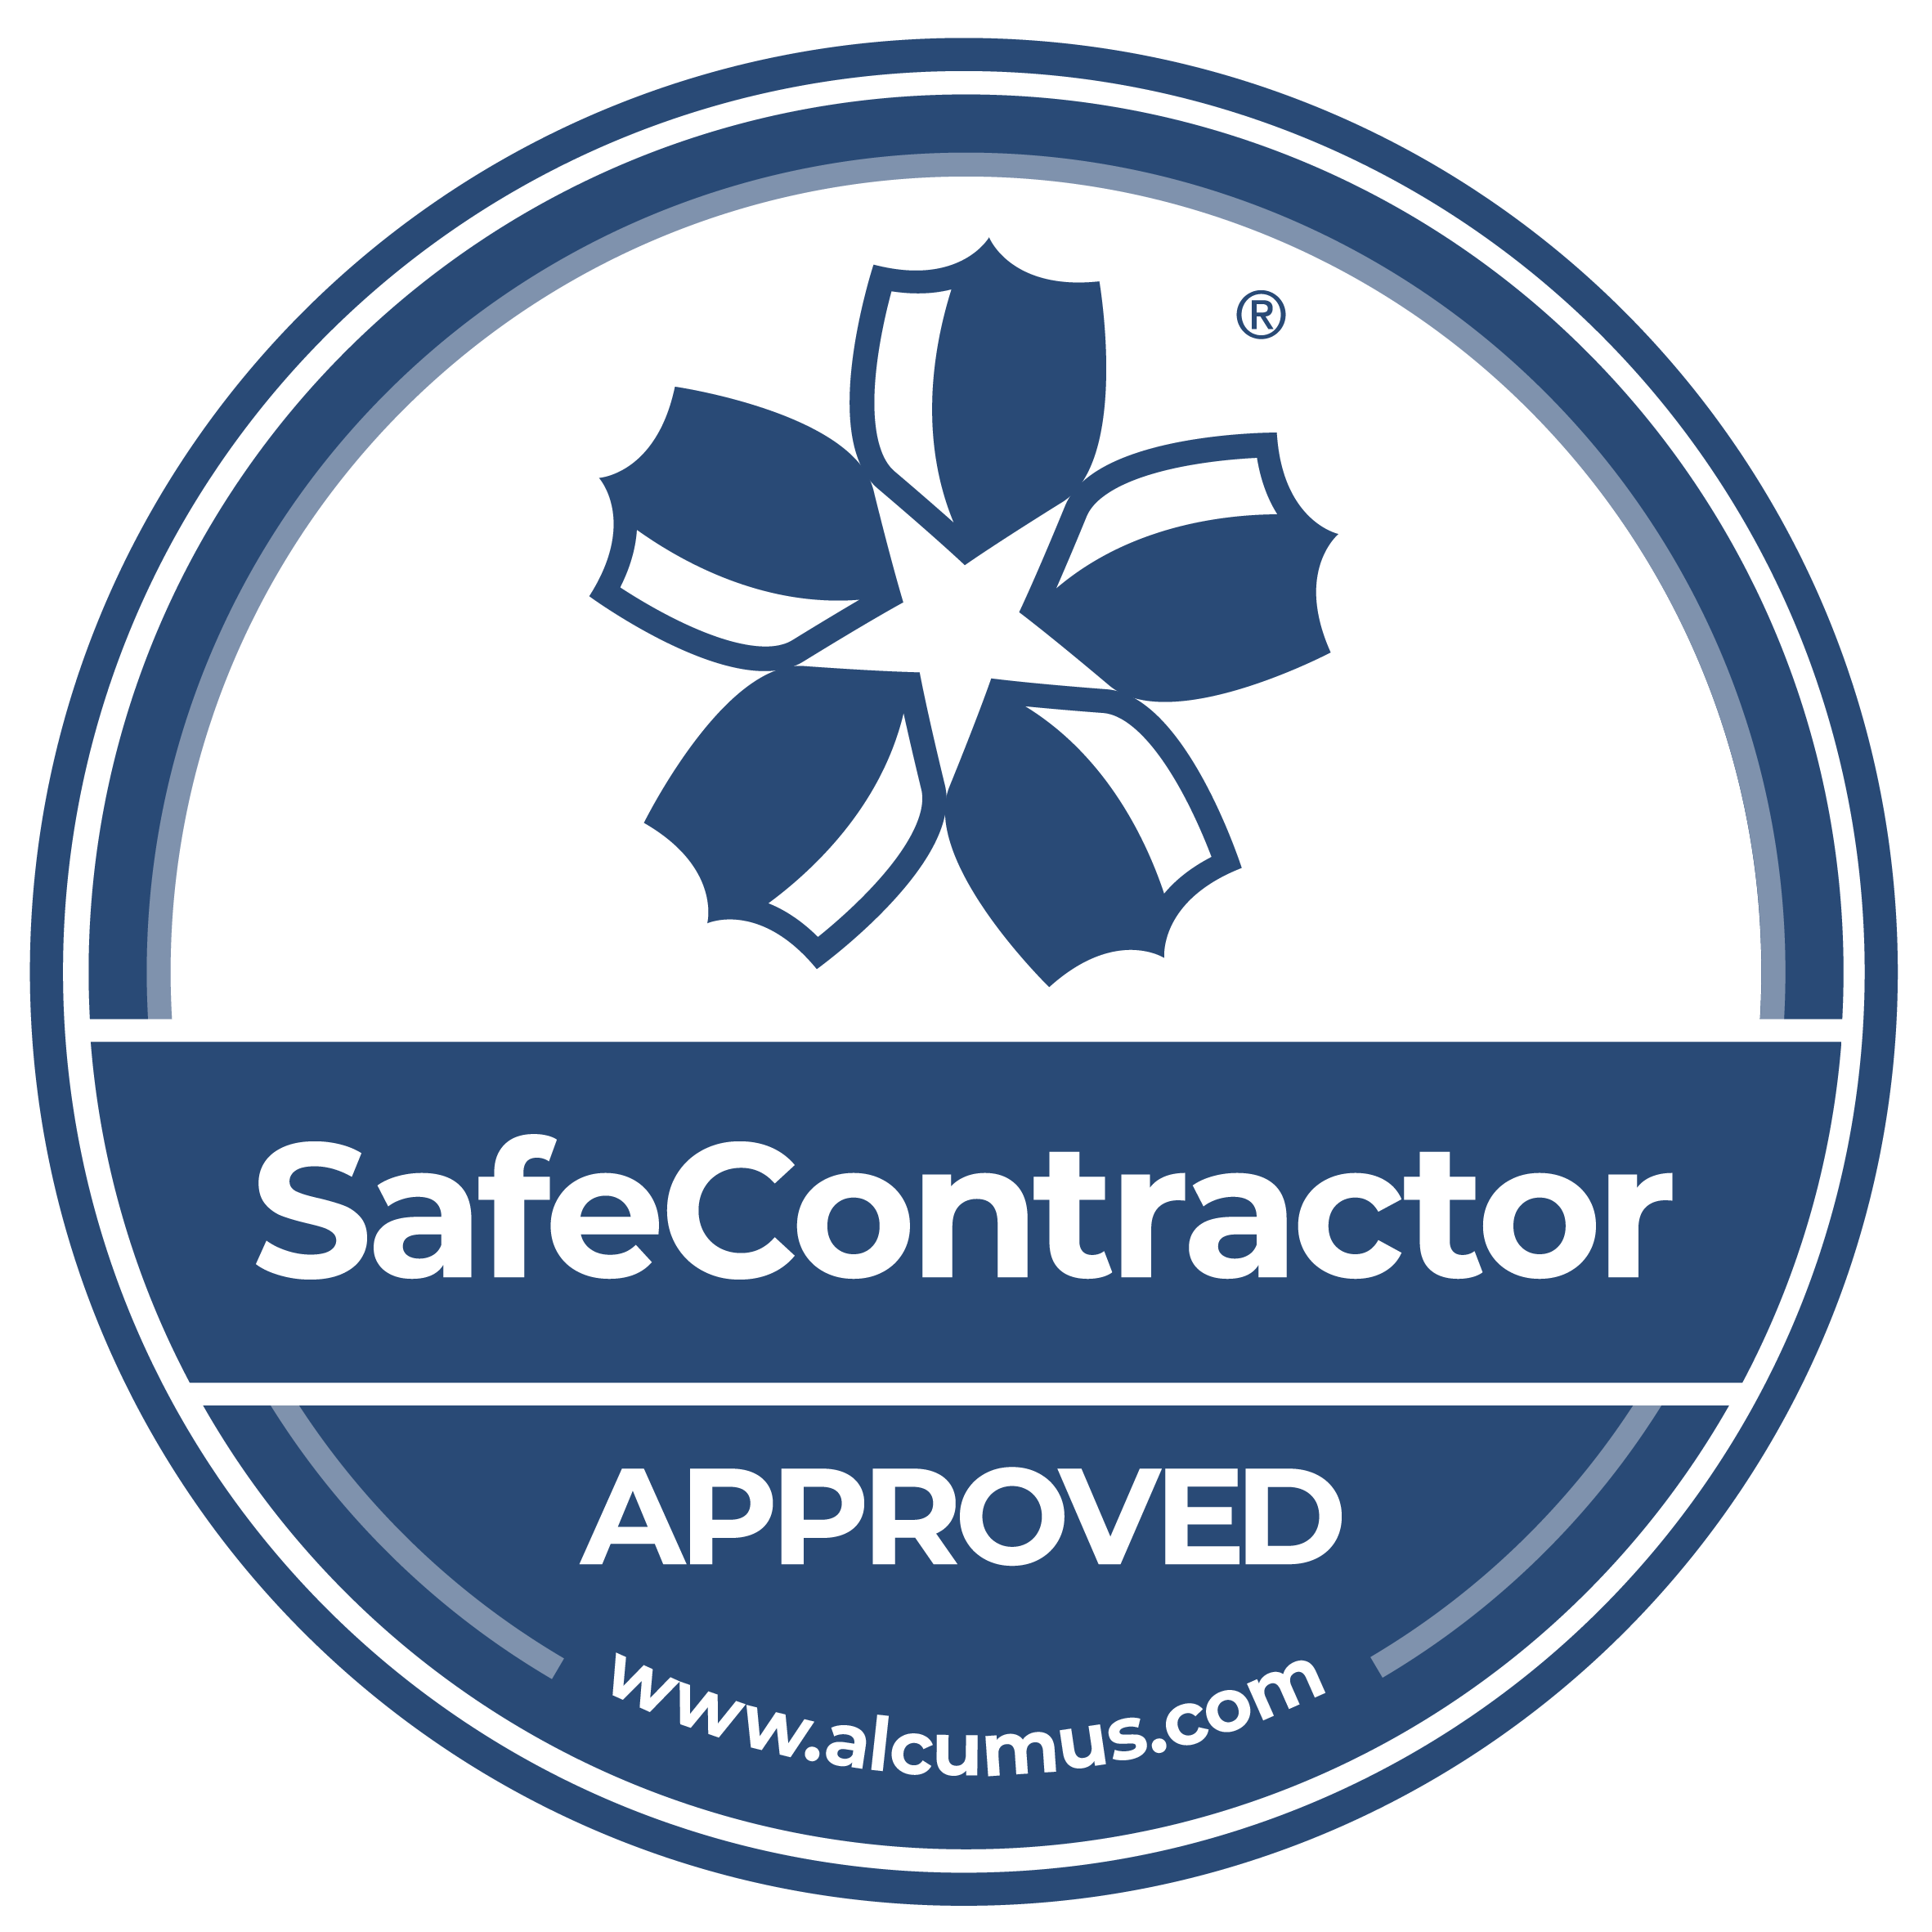 Special Branch Tree Services are SafeContractor approved